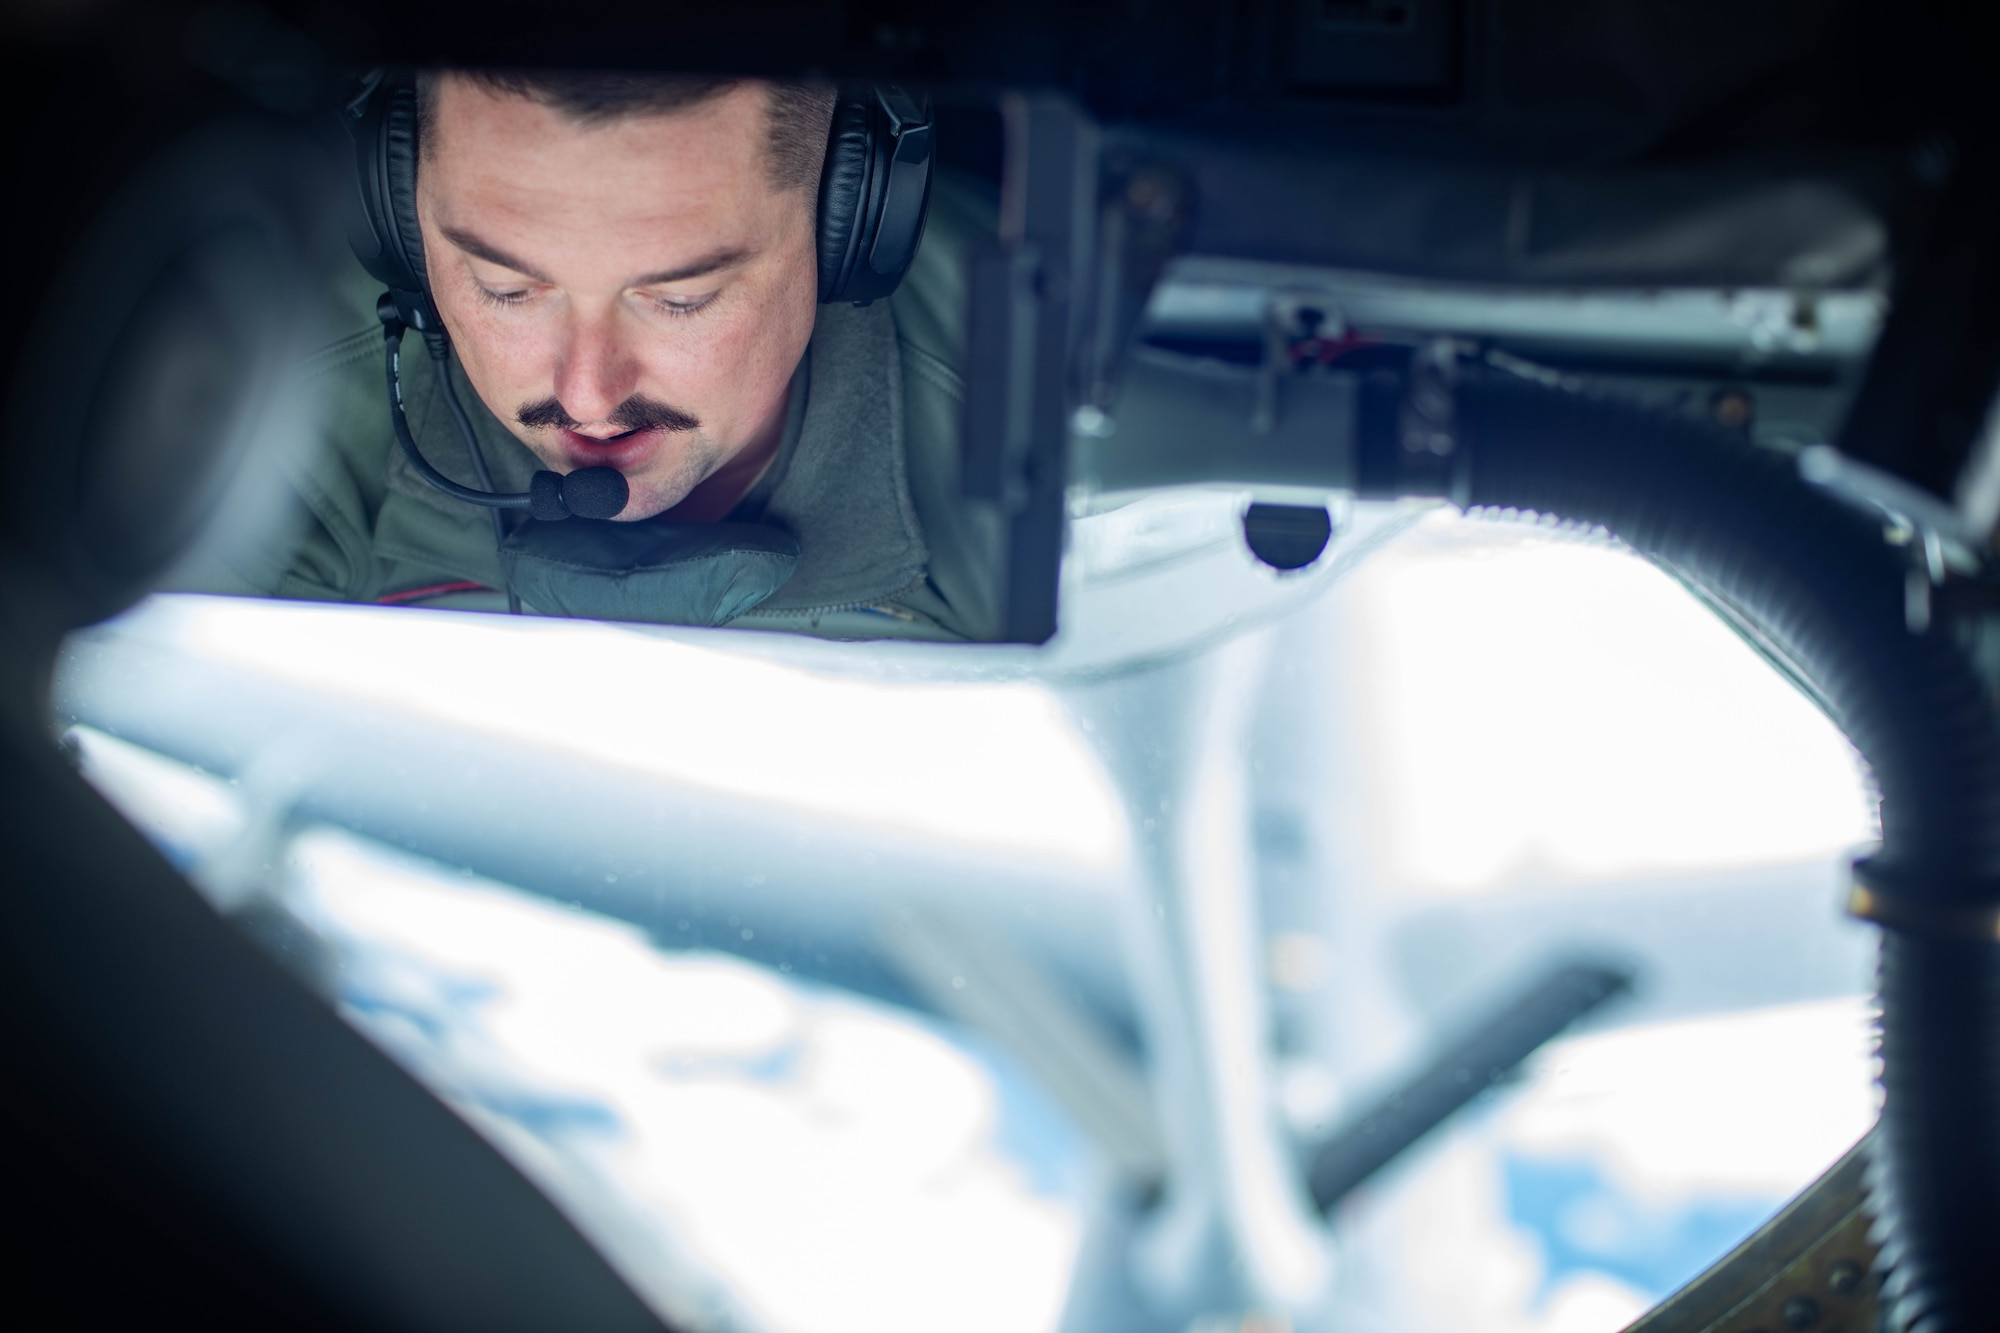 U.S. Air Force Staff Sgt. Tyler Espinoza, 909th Air Refueling Squadron boom operator, prepares to refuel an B-52 Stratofortress, assigned to the 5th Bomb Wing, over the Pacific, Oct. 27, 2022. Boom operators directly control the metal arm located in the rear of refueling aircraft, commonly known as the "boom," to refuel Ally aircraft in mid-air. (U.S. Air Force photo by Airman Alexis Redin)